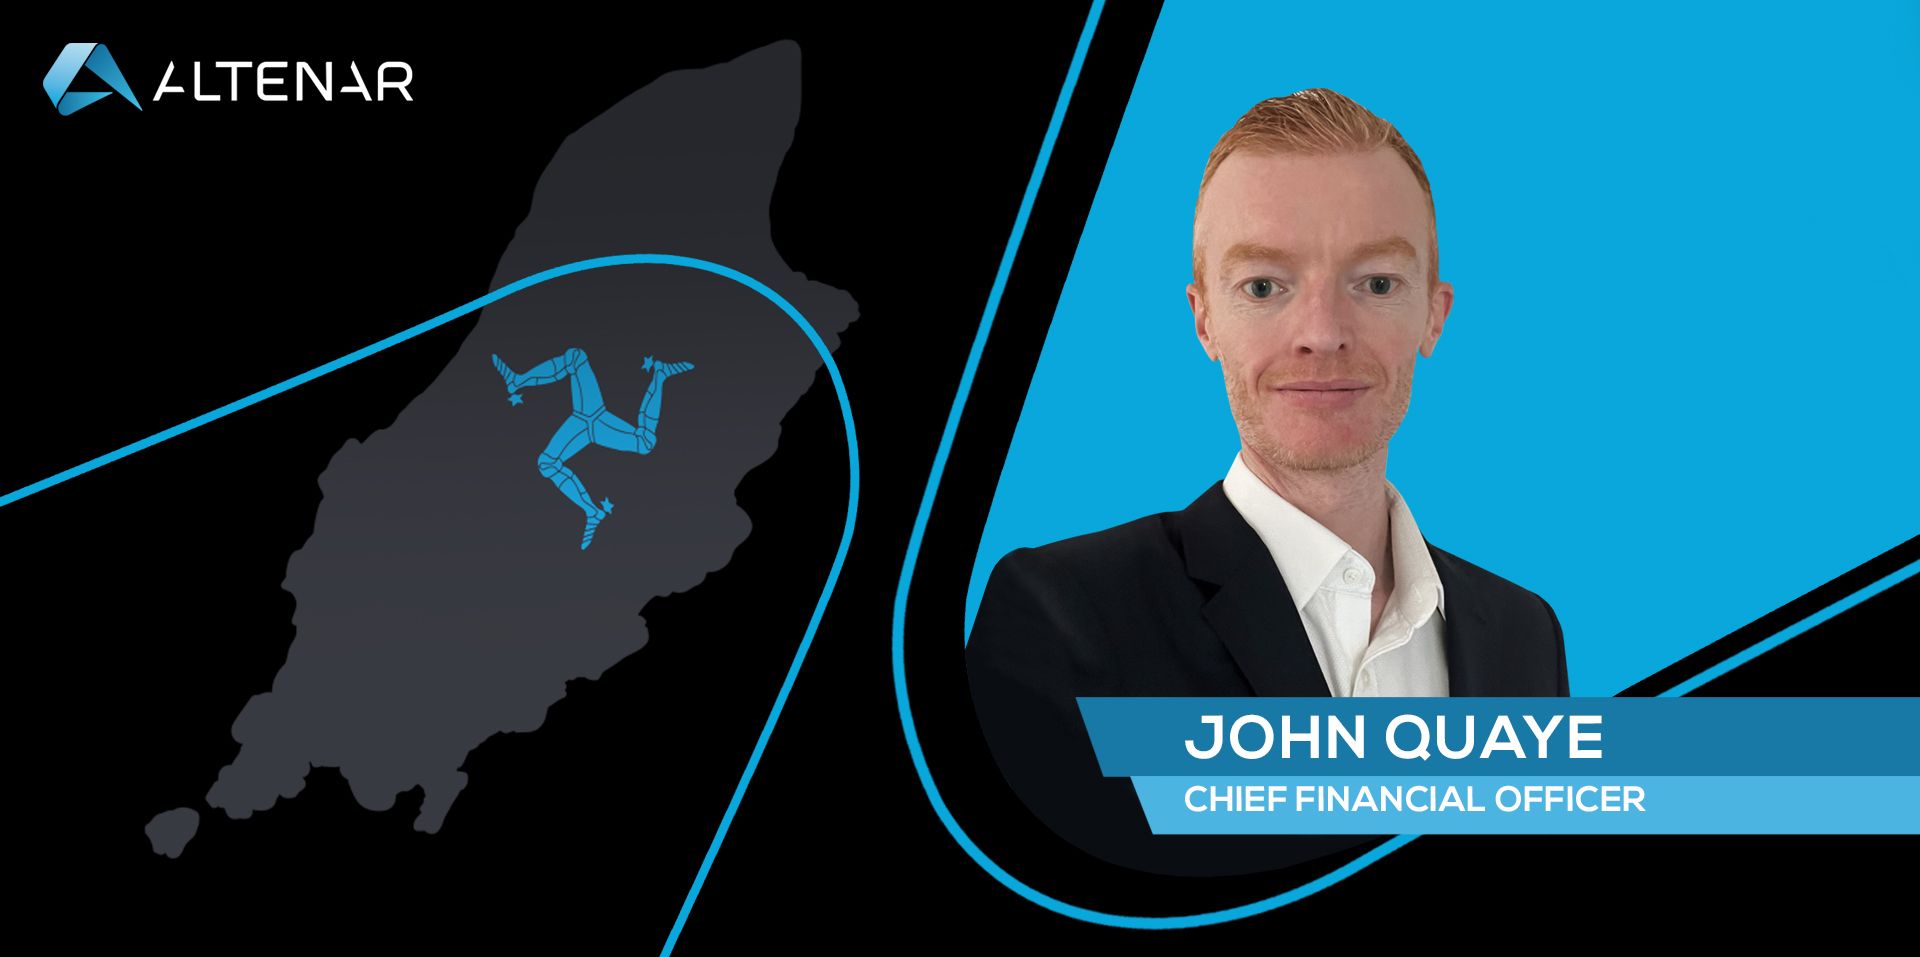 CFO John Quaye Interviewed On His Role, Accounting & The Benefits Of Being In The Isle Of Man and Altenar 